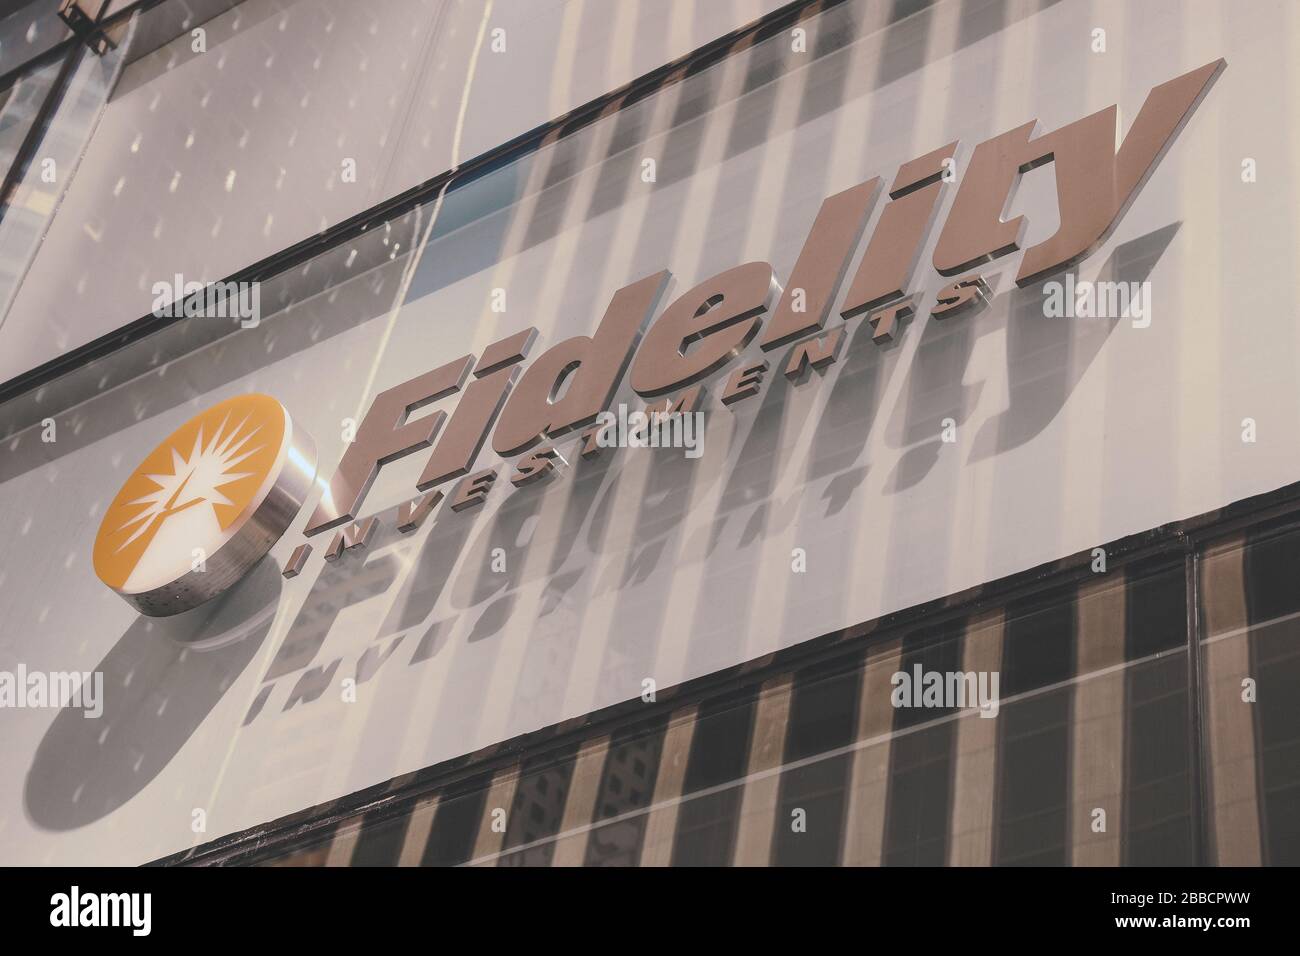 Fidelity Investments Sign,New York Stock Photo